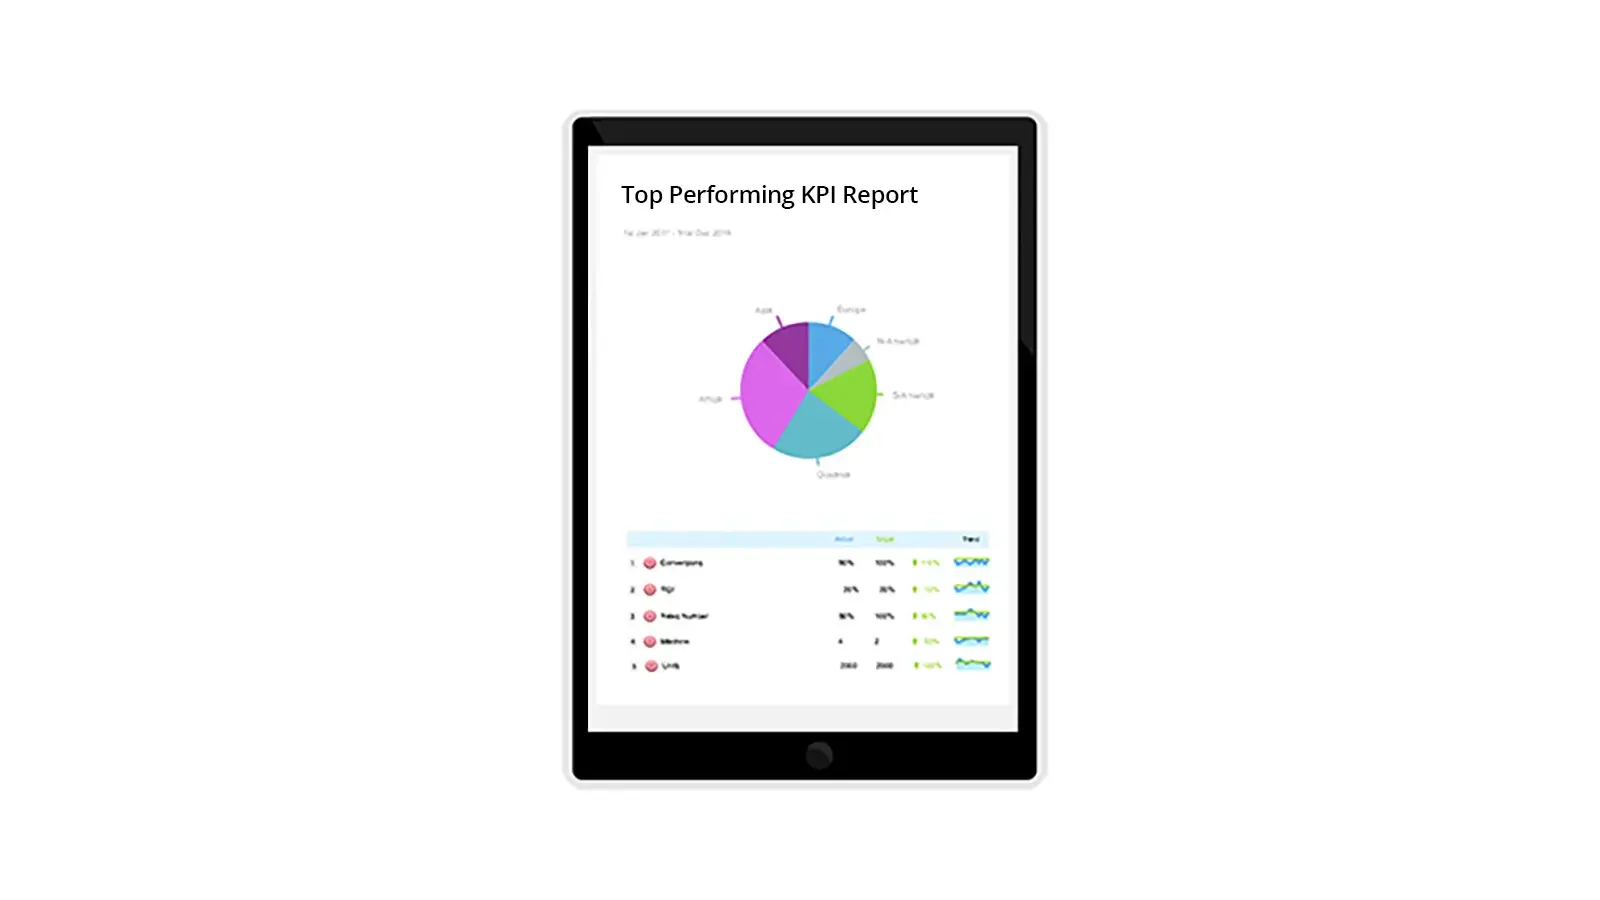 KPIs displayed on a KPI Report